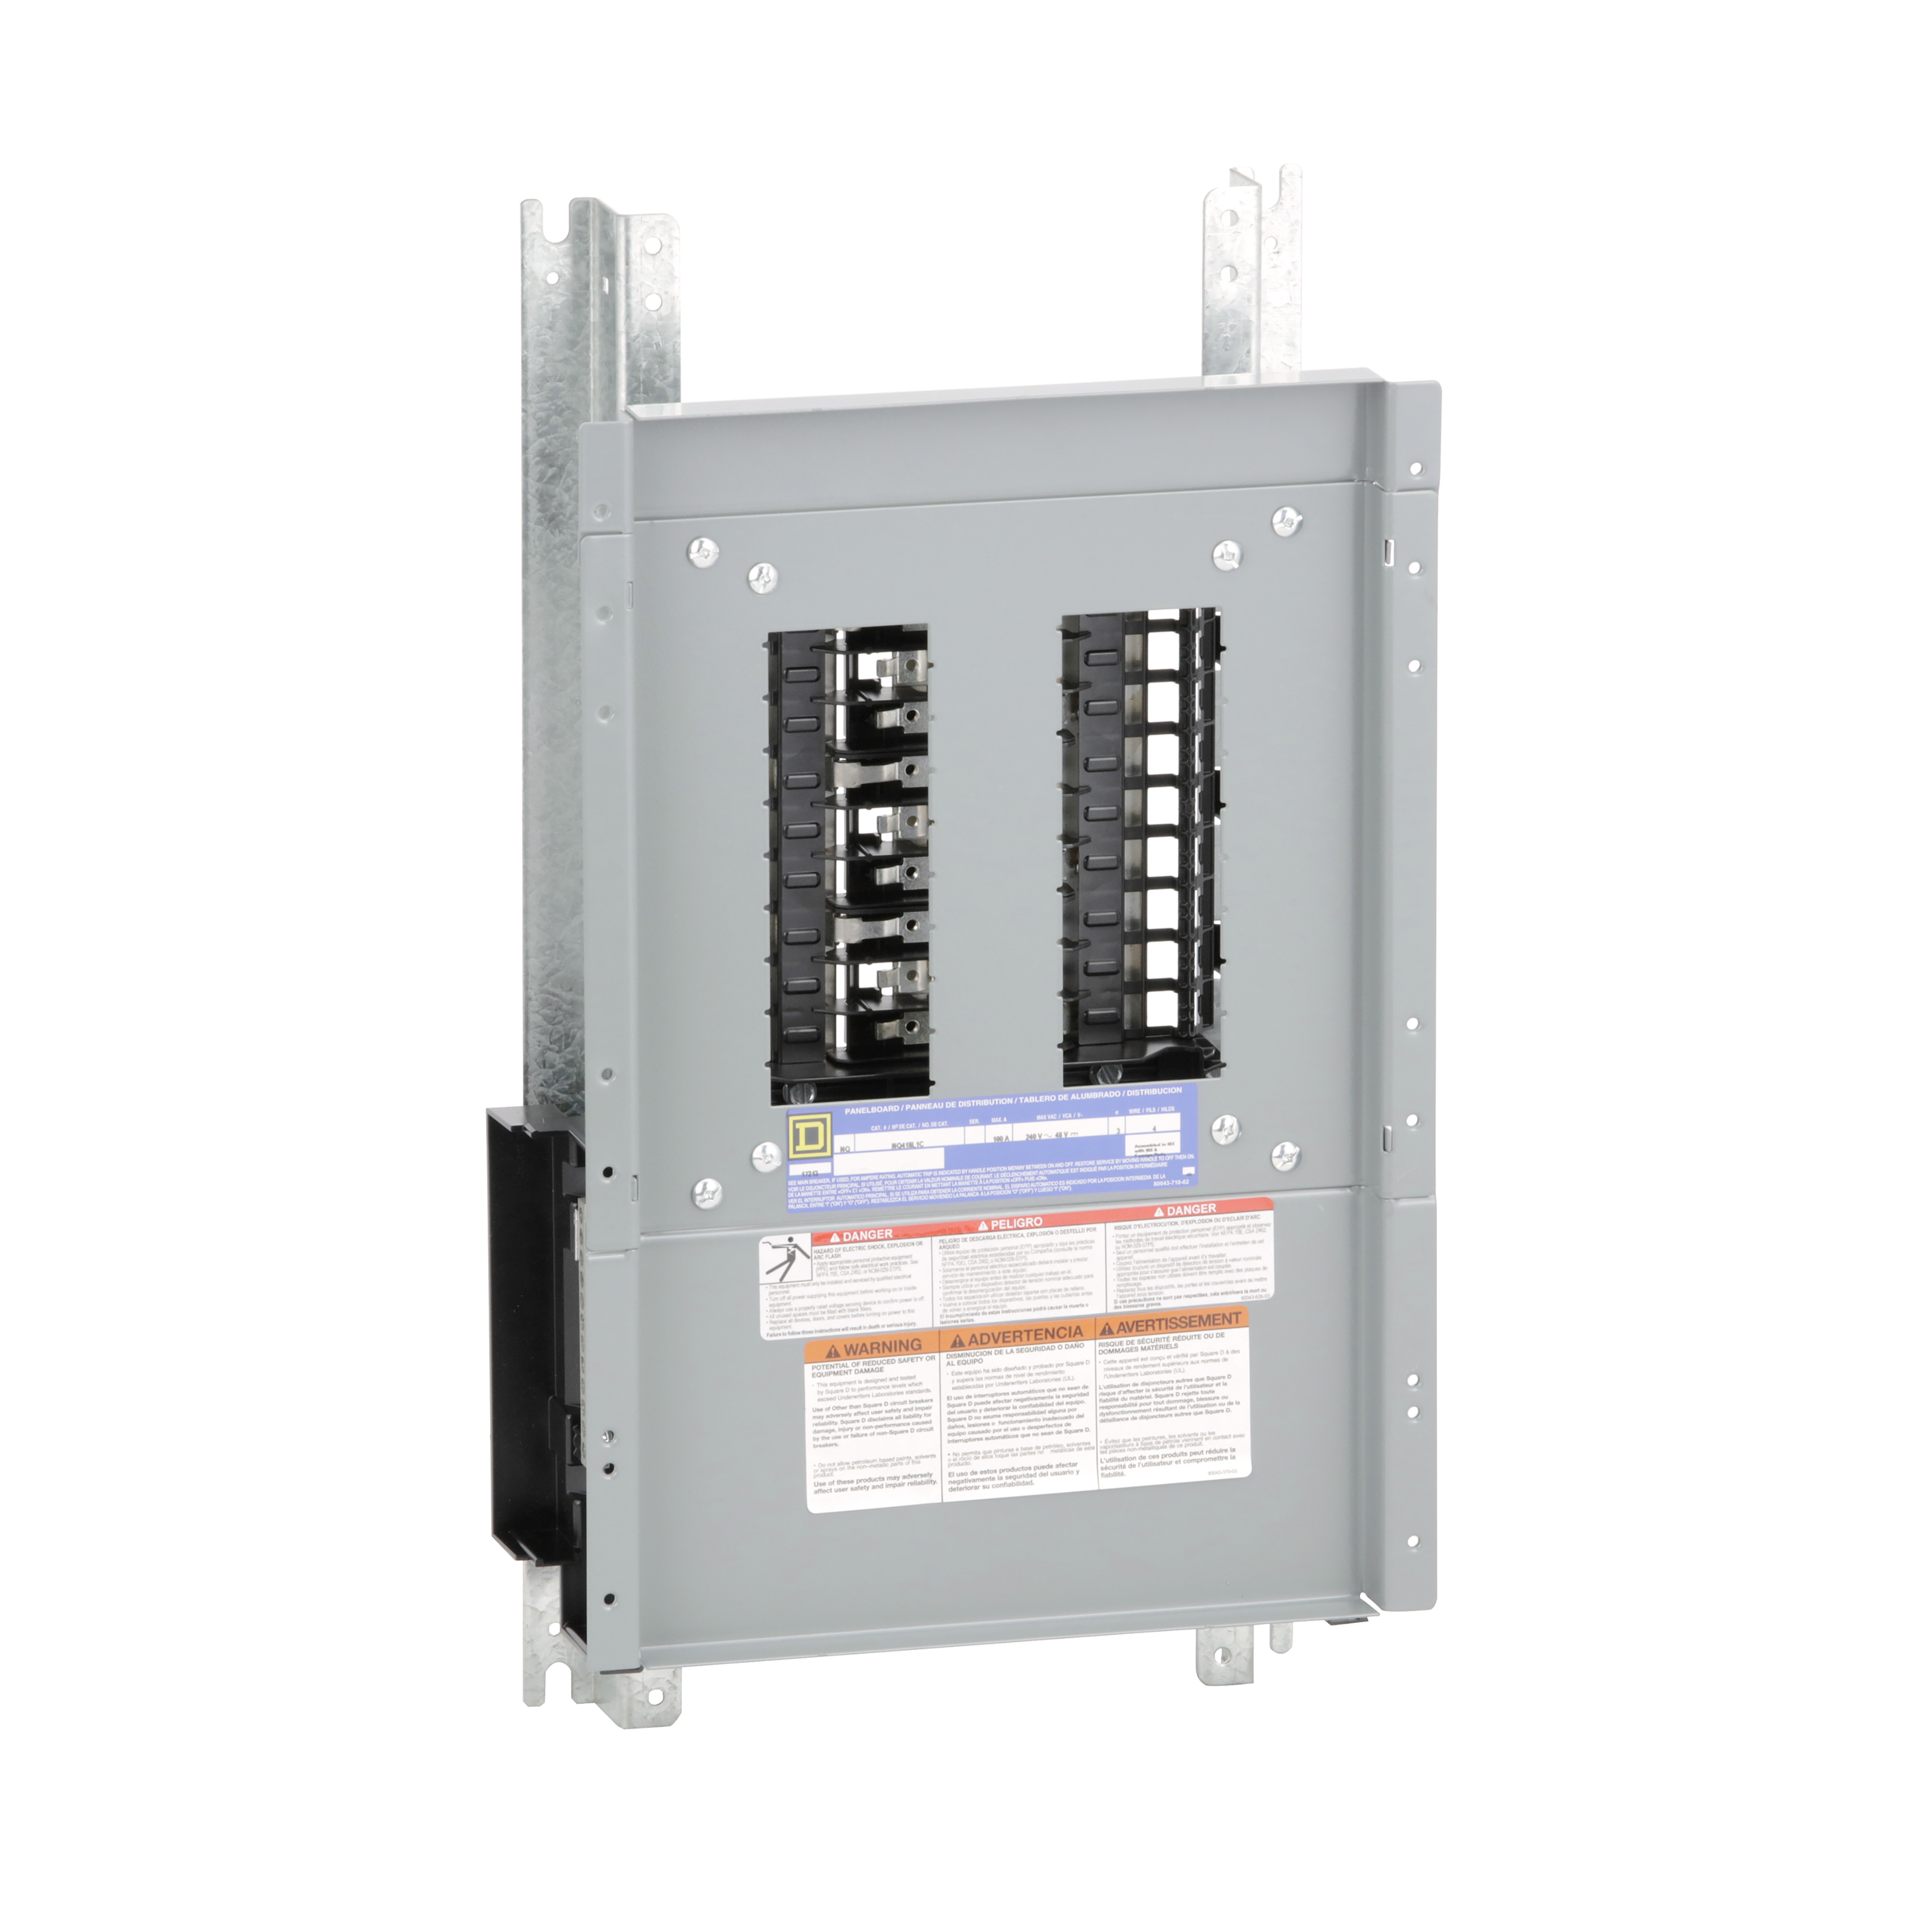 Panelboard interior, NQ, main lugs, 100A, Cu bus, 18 pole spaces, 3 phase, 4 wire, 240VAC, 48VDC